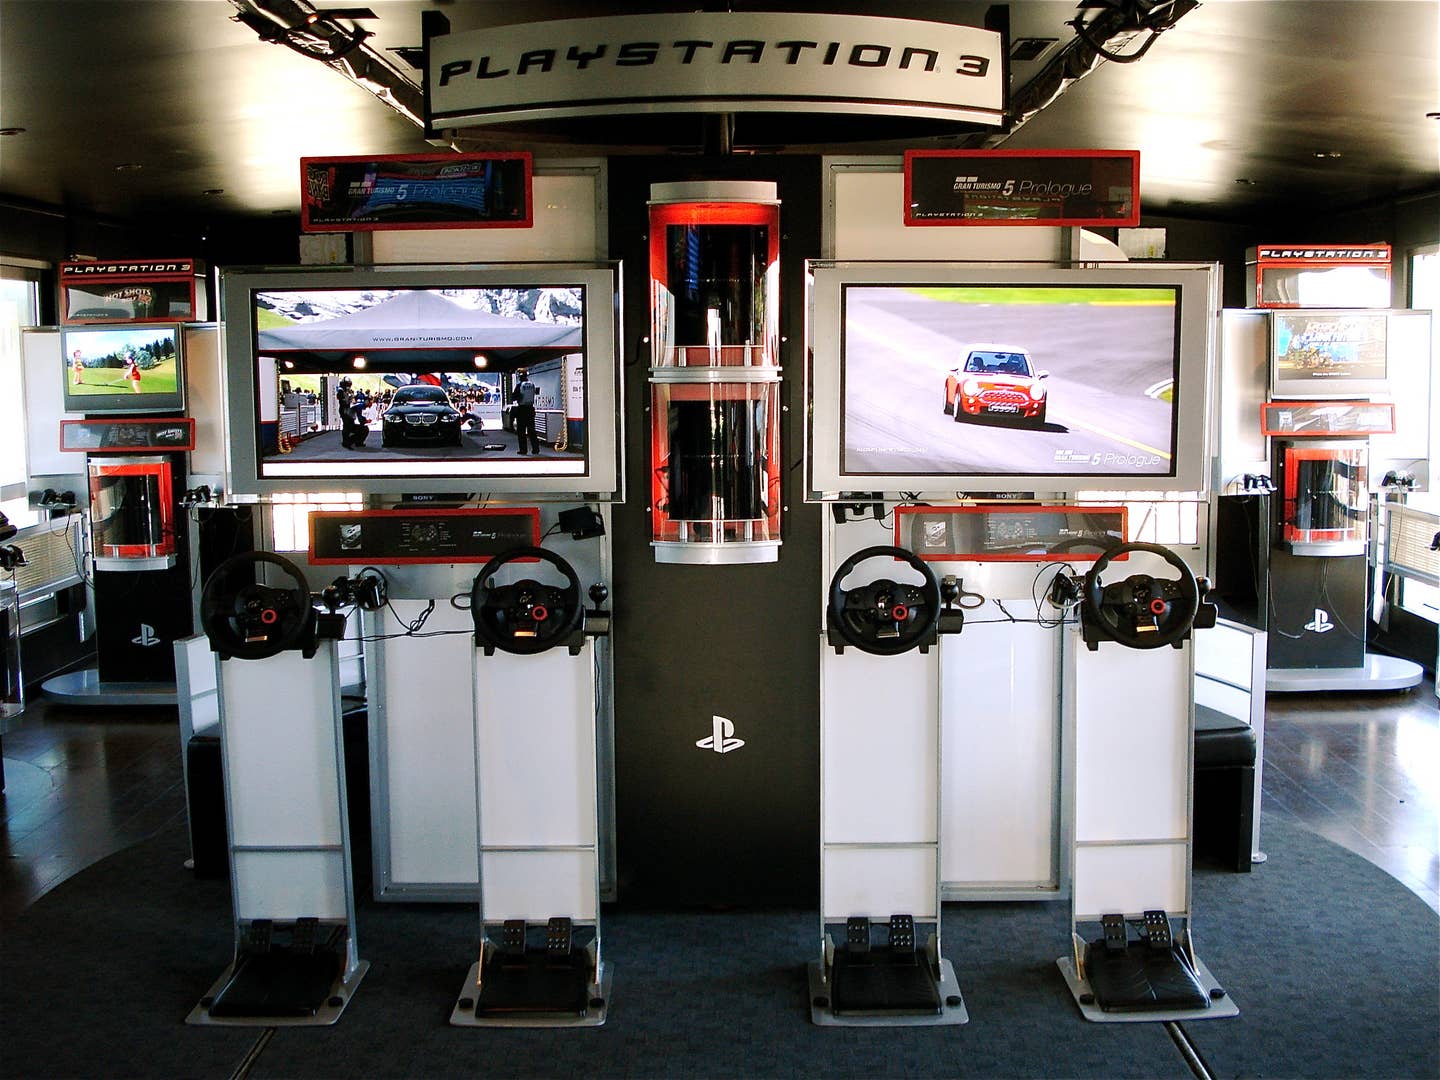 A photo of a PlayStation Experience truck back when it was demoing Gran Turismo 5 Prologue, with what looks to be a very uncomfortable standing rig setup.